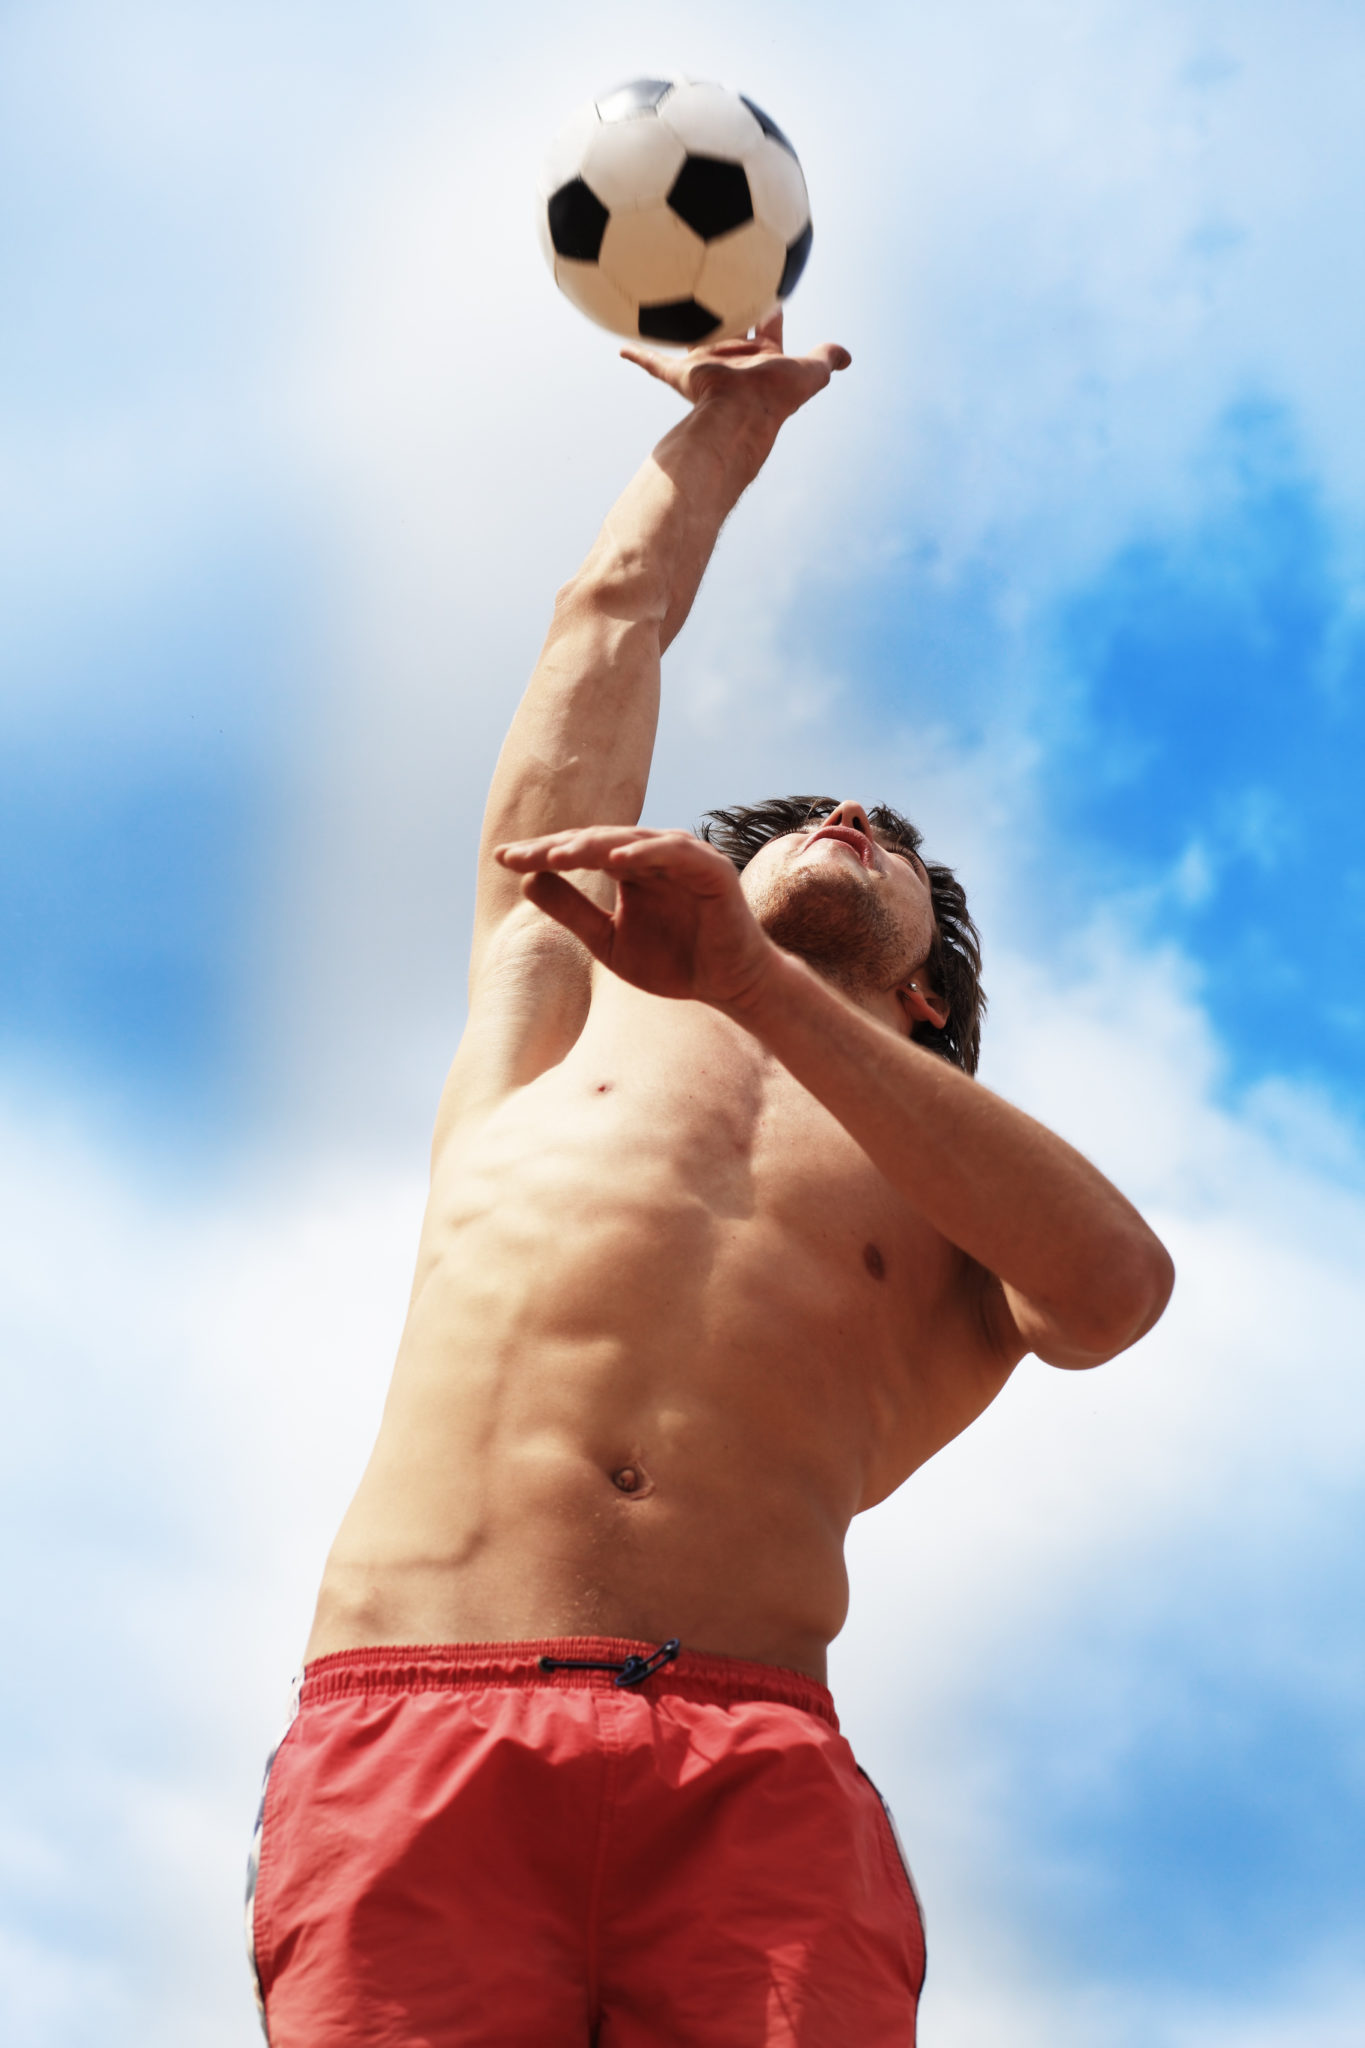 Bare chested man playing volleyball | Featured image for the Chest Physiotherapy page at Pivotal Motion.